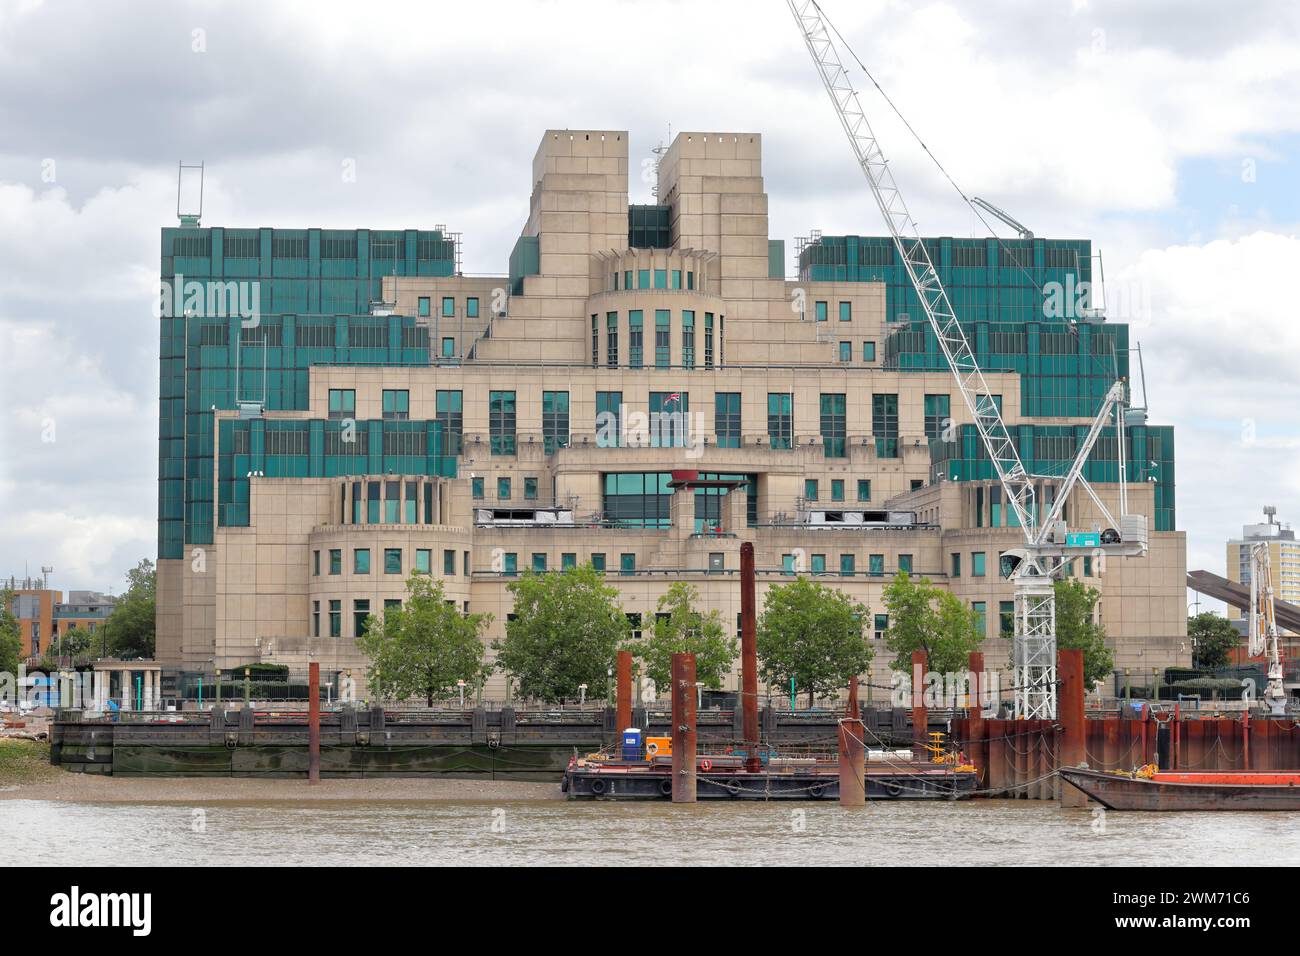 The SIS Building, also called the MI6 Building,  the headquarters of the Secret Intelligence Service (SIS, MI6) Stock Photo